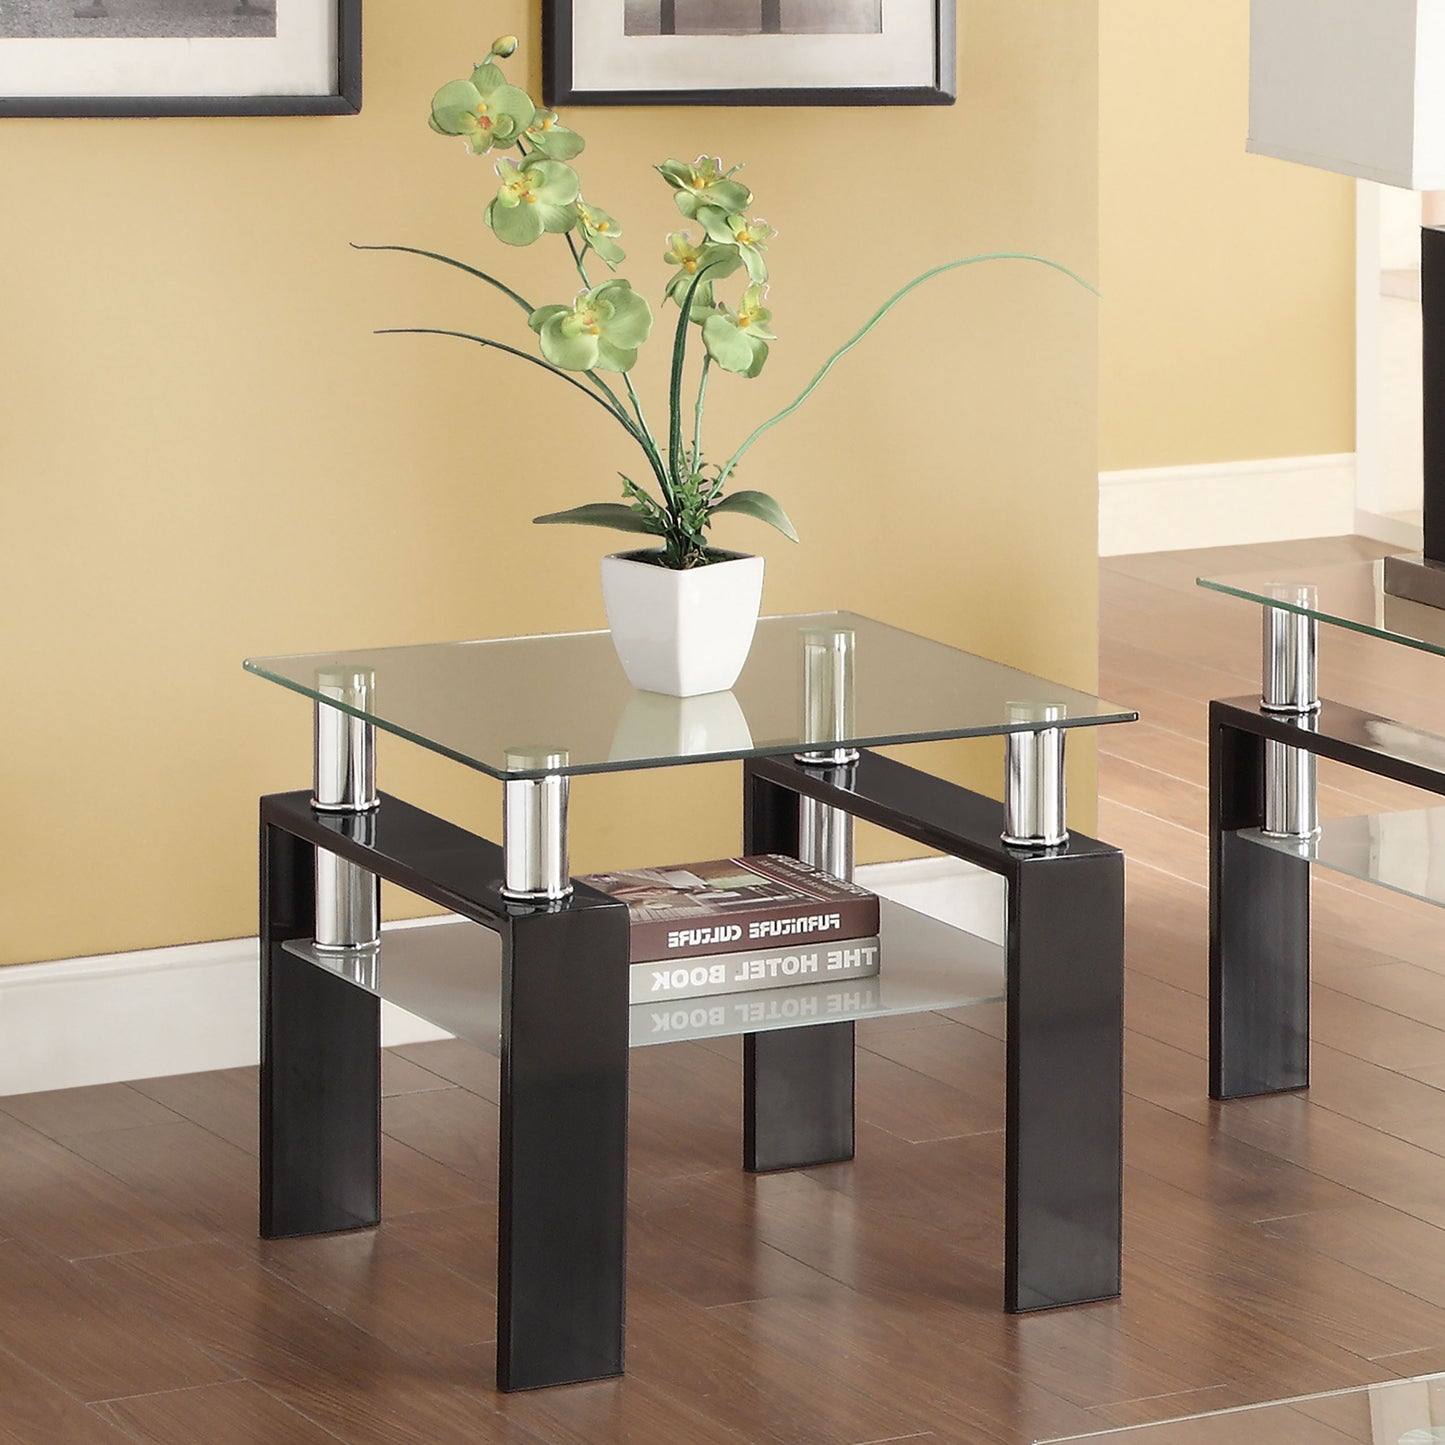 Dyer Tempered Glass End Table with Shelf Black